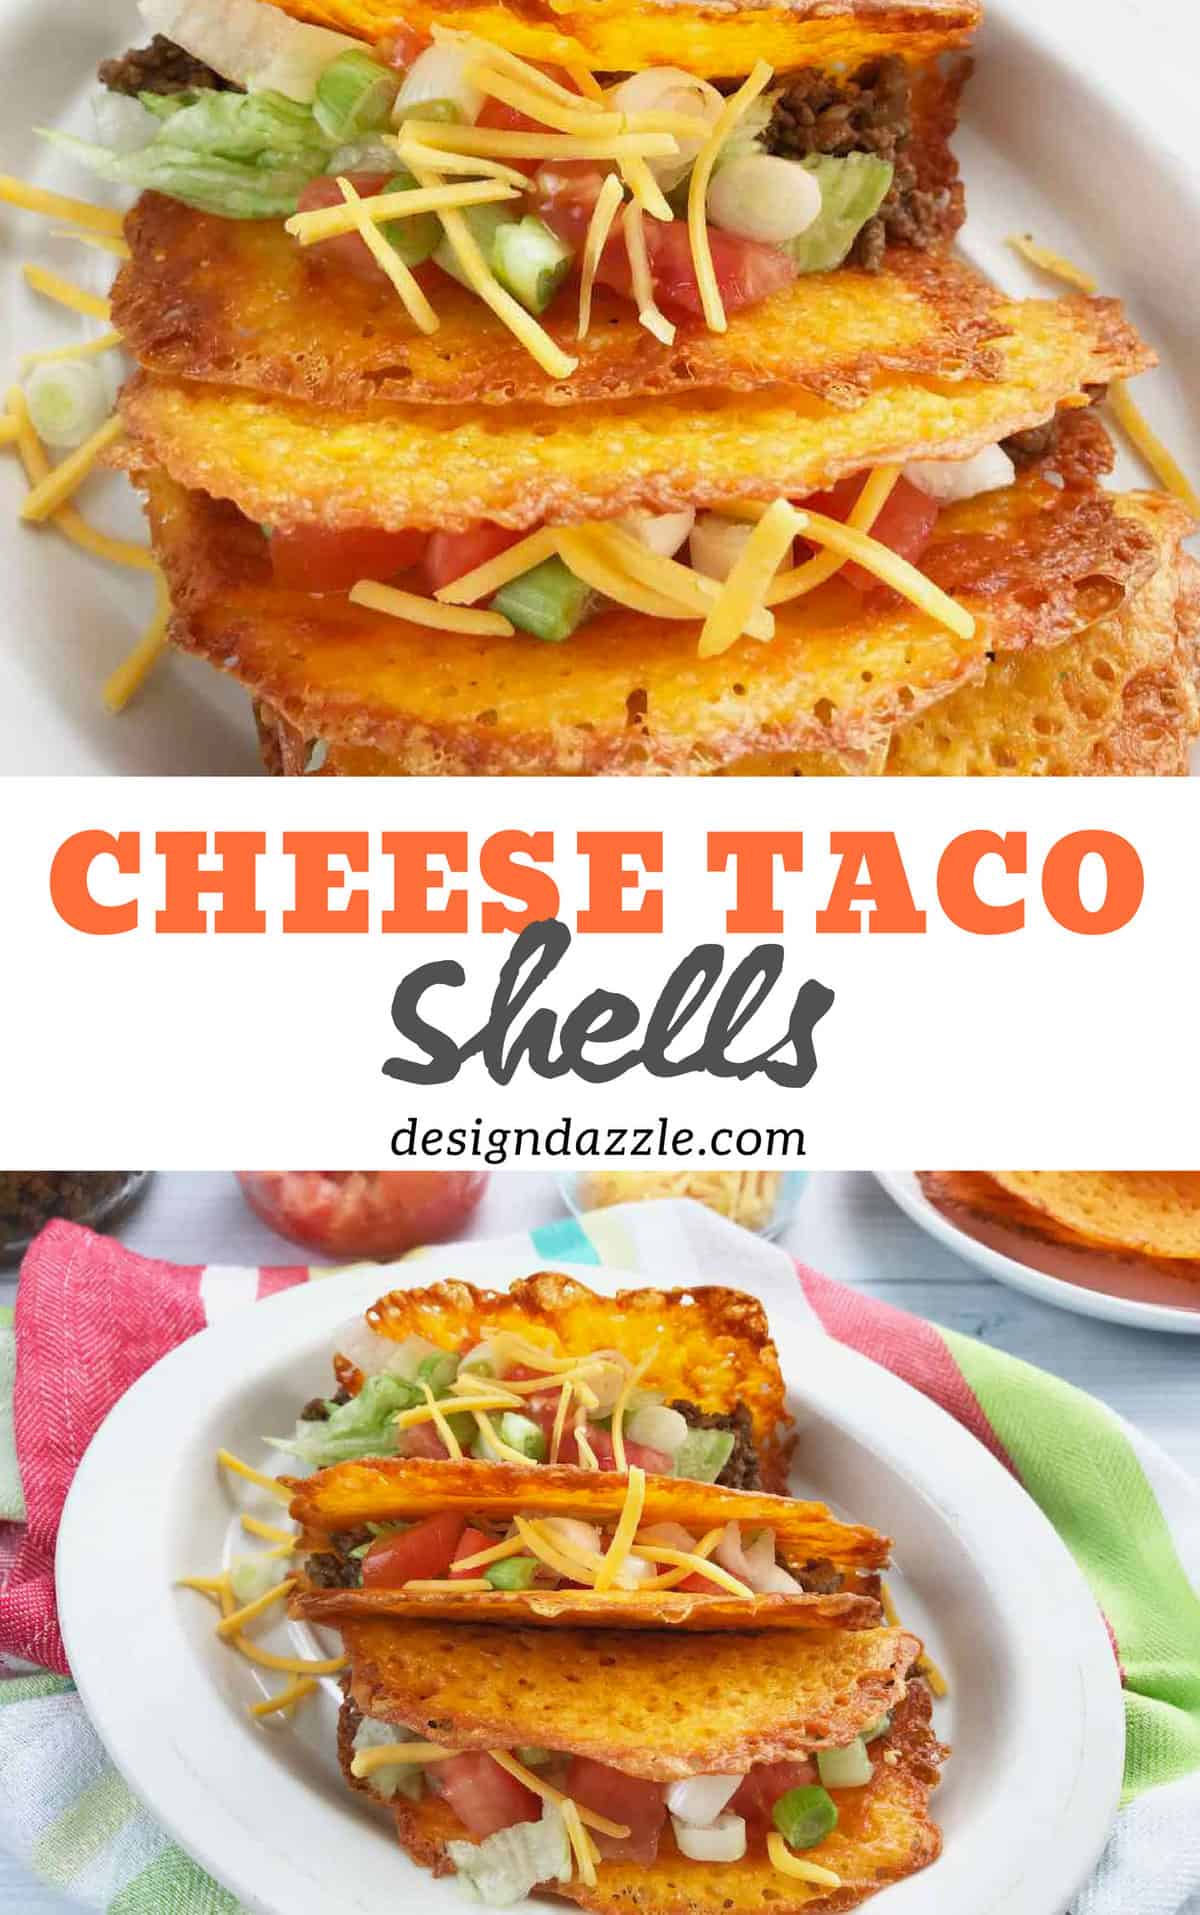 These cheese taco shells are a unique way to serve something with a Mexican feel. The creative twist of using cheese for making the taco is the fun part! - Design Dazzle